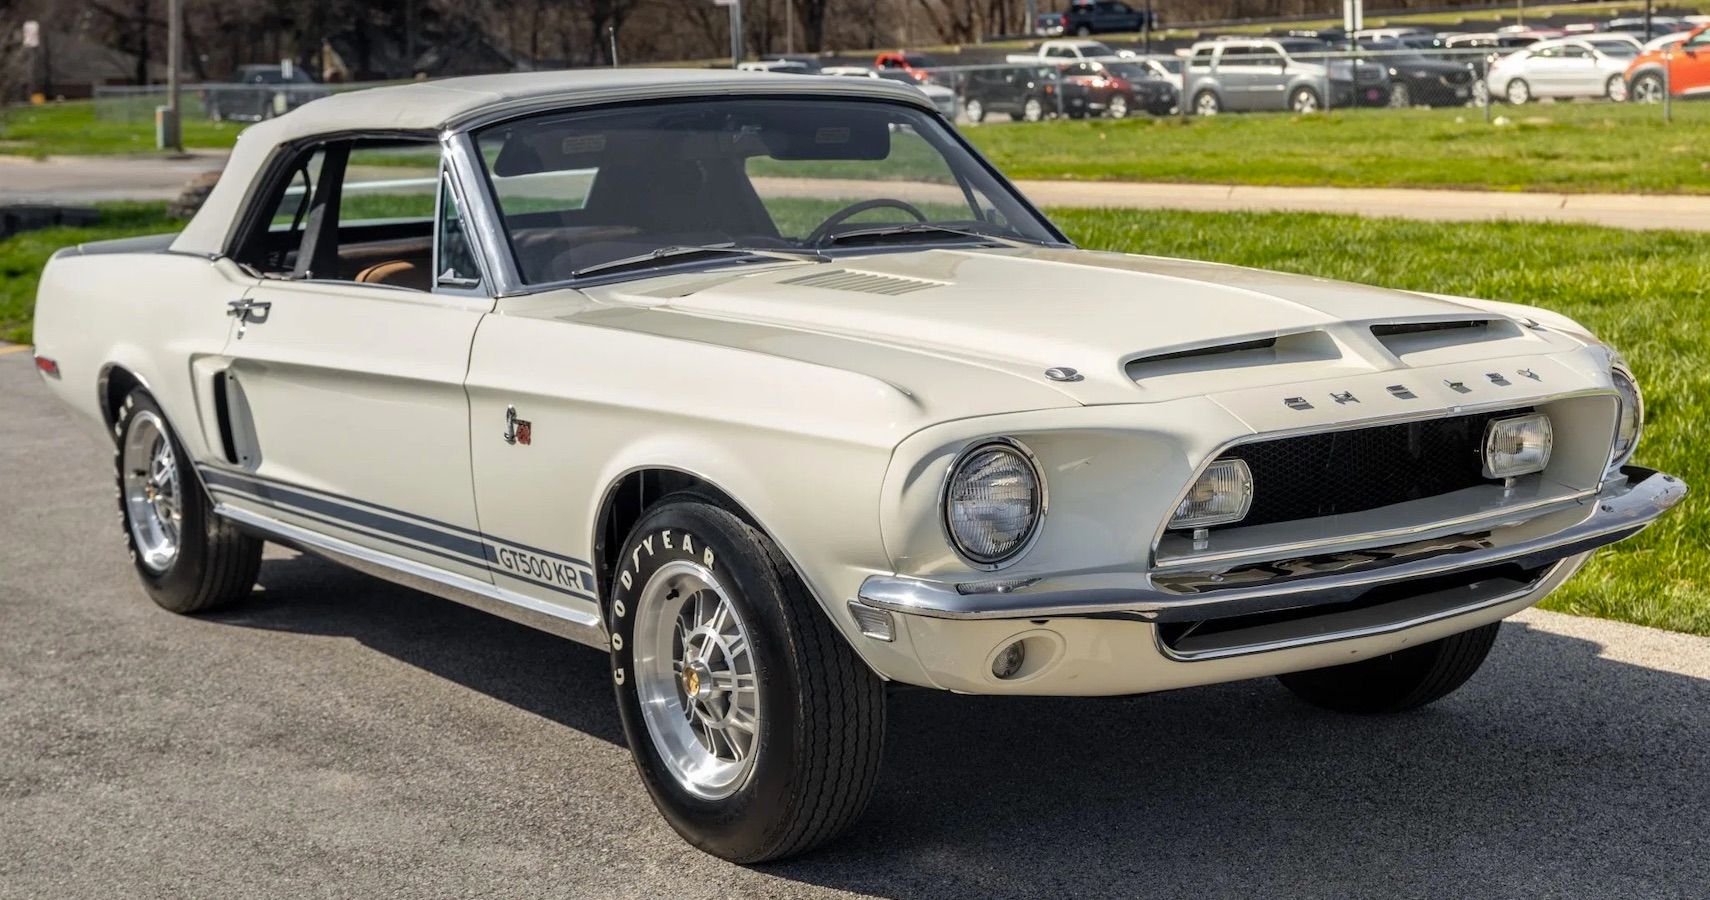 Bring A Trailer Find: 1968 Shelby Mustang GT500KR Convertible